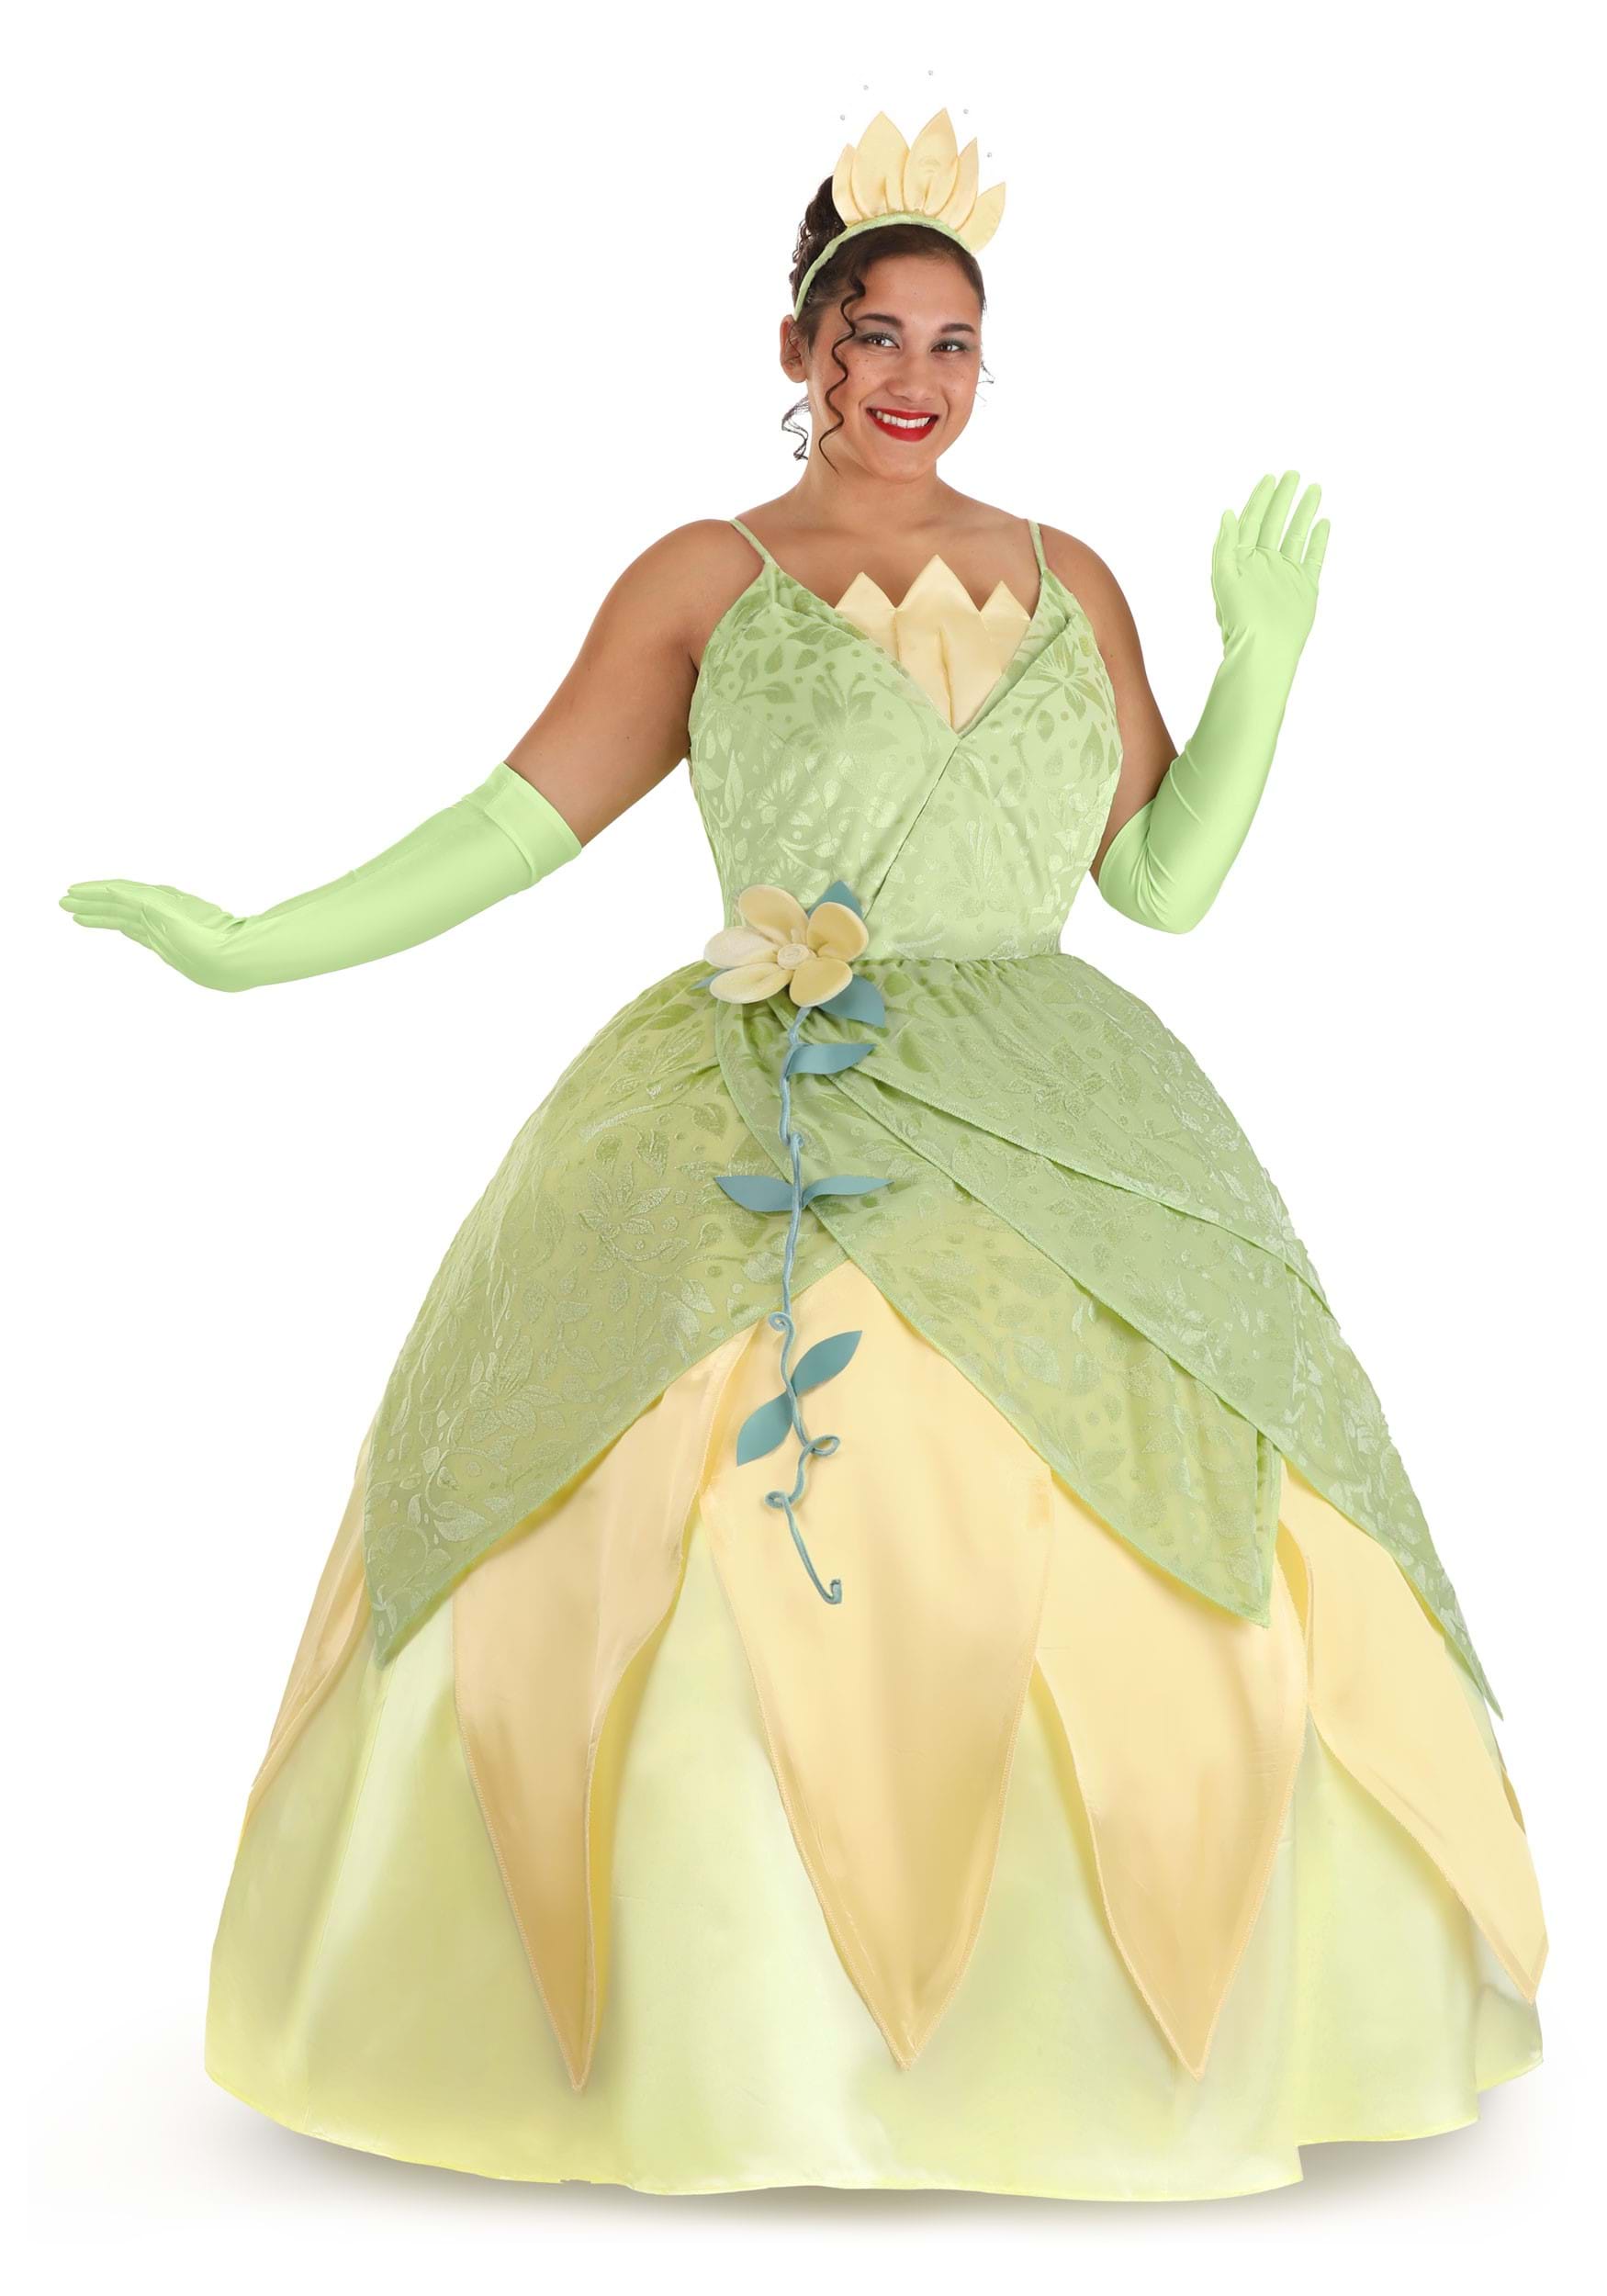 Photos - Fancy Dress Deluxe FUN Costumes Plus Size  Disney Women's Princess and the Frog Tiana C 